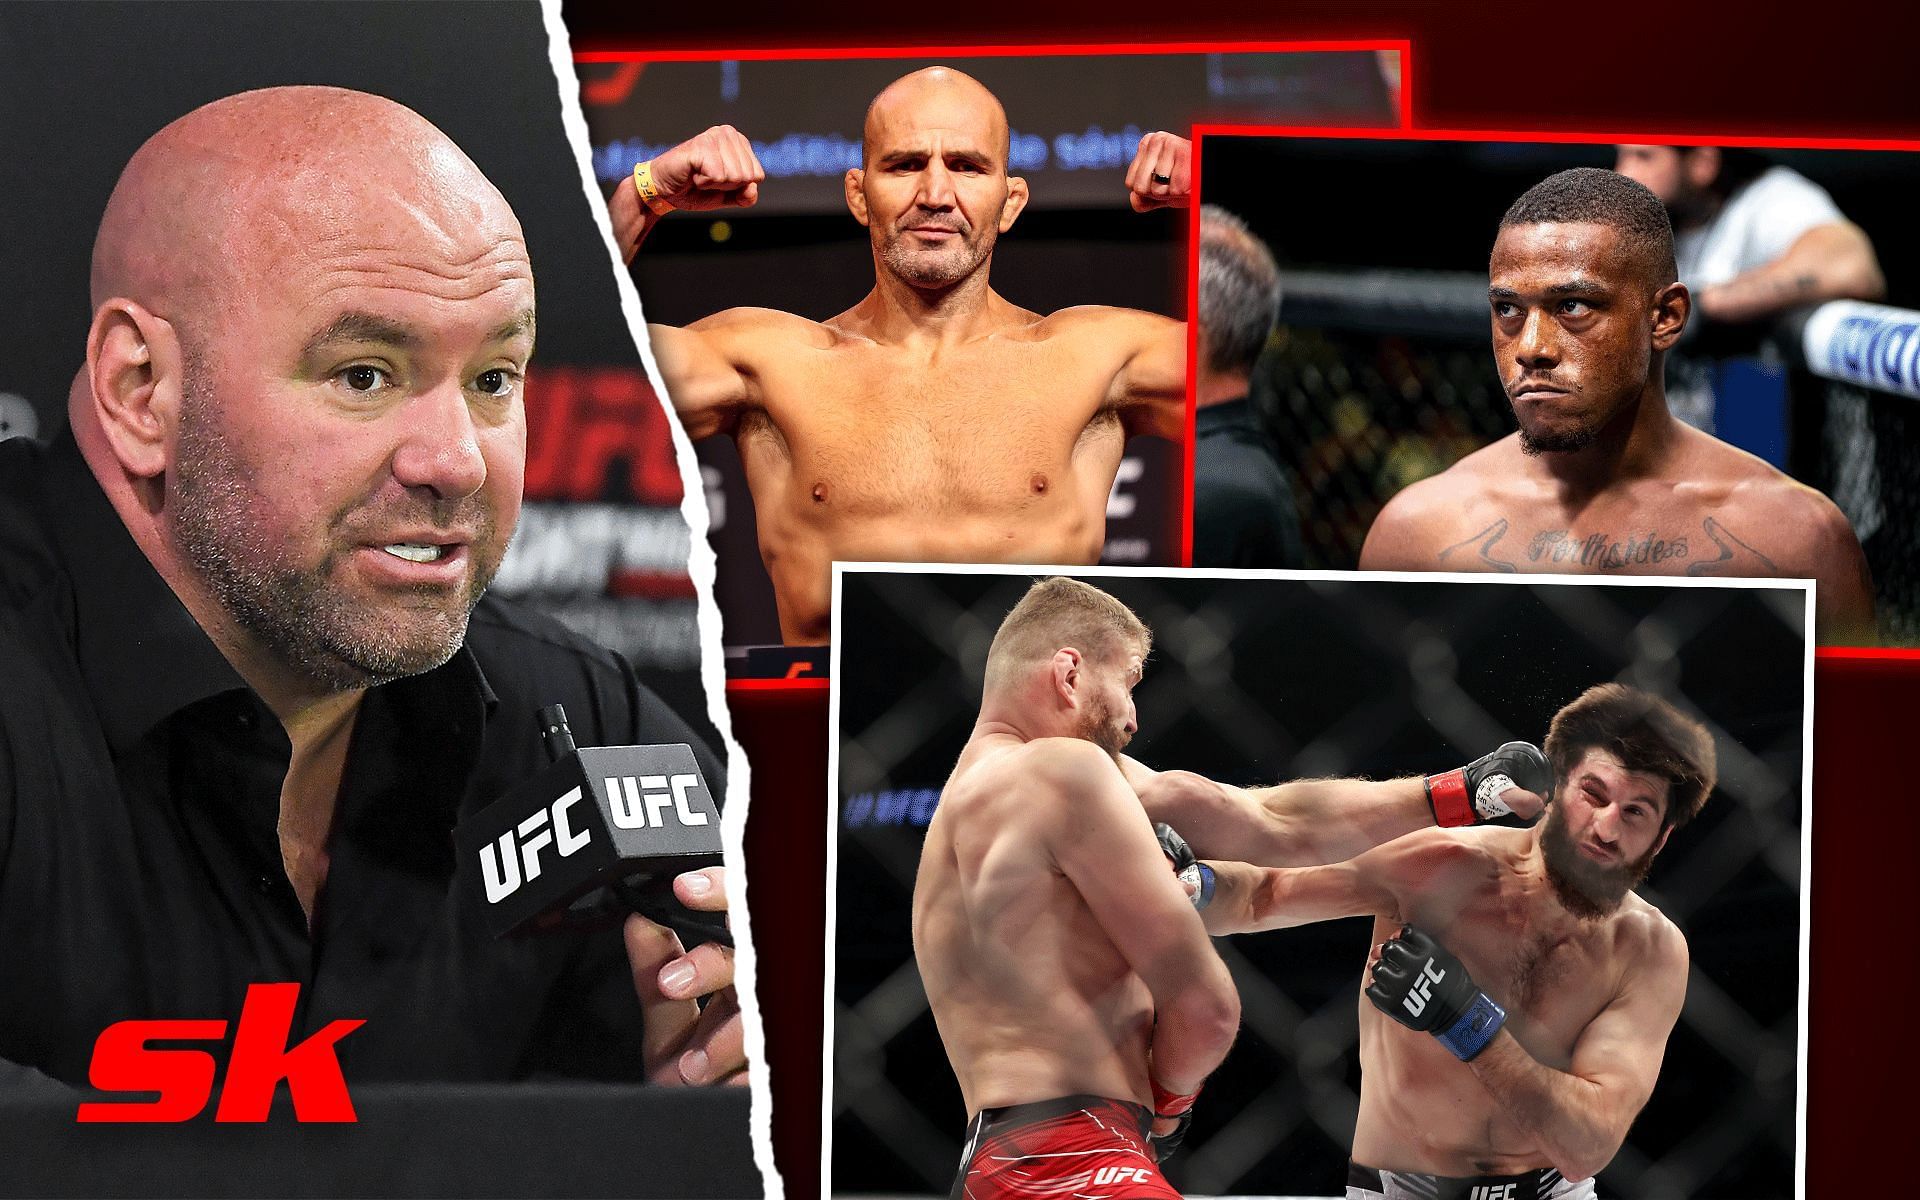 Dana White (Left), Glover Teixeira and Jamahal Hill (Top), Jan Blachowicz vs. Magomed Ankalaev (Bottom) [Image courtesy: Getty and @sweet_dreams_jhill on Instagram]